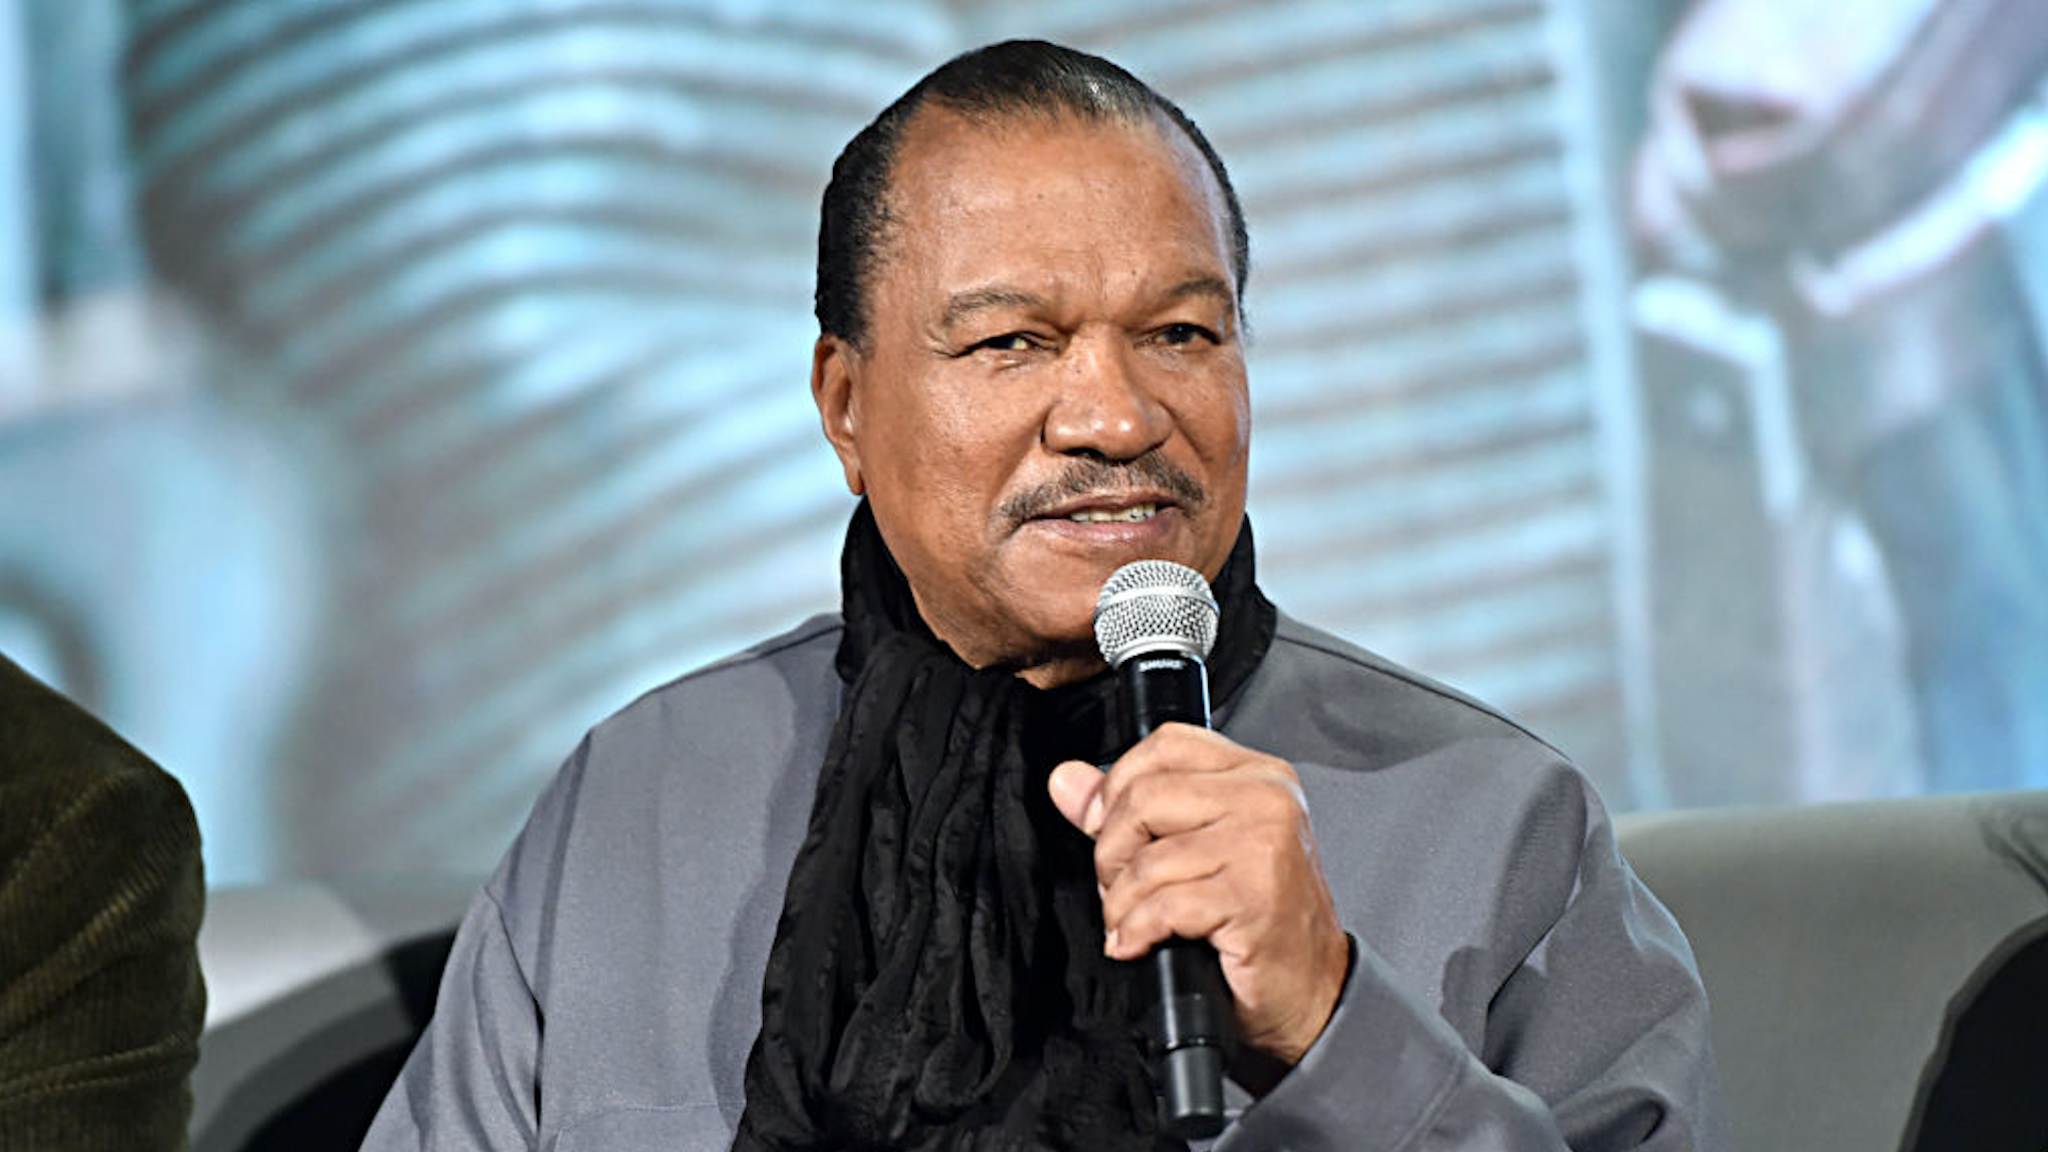 Billy Dee Williams participates in the global press conference for "Star Wars: The Rise of Skywalker" at the Pasadena Convention Center on December 04, 2019 in Pasadena, California.